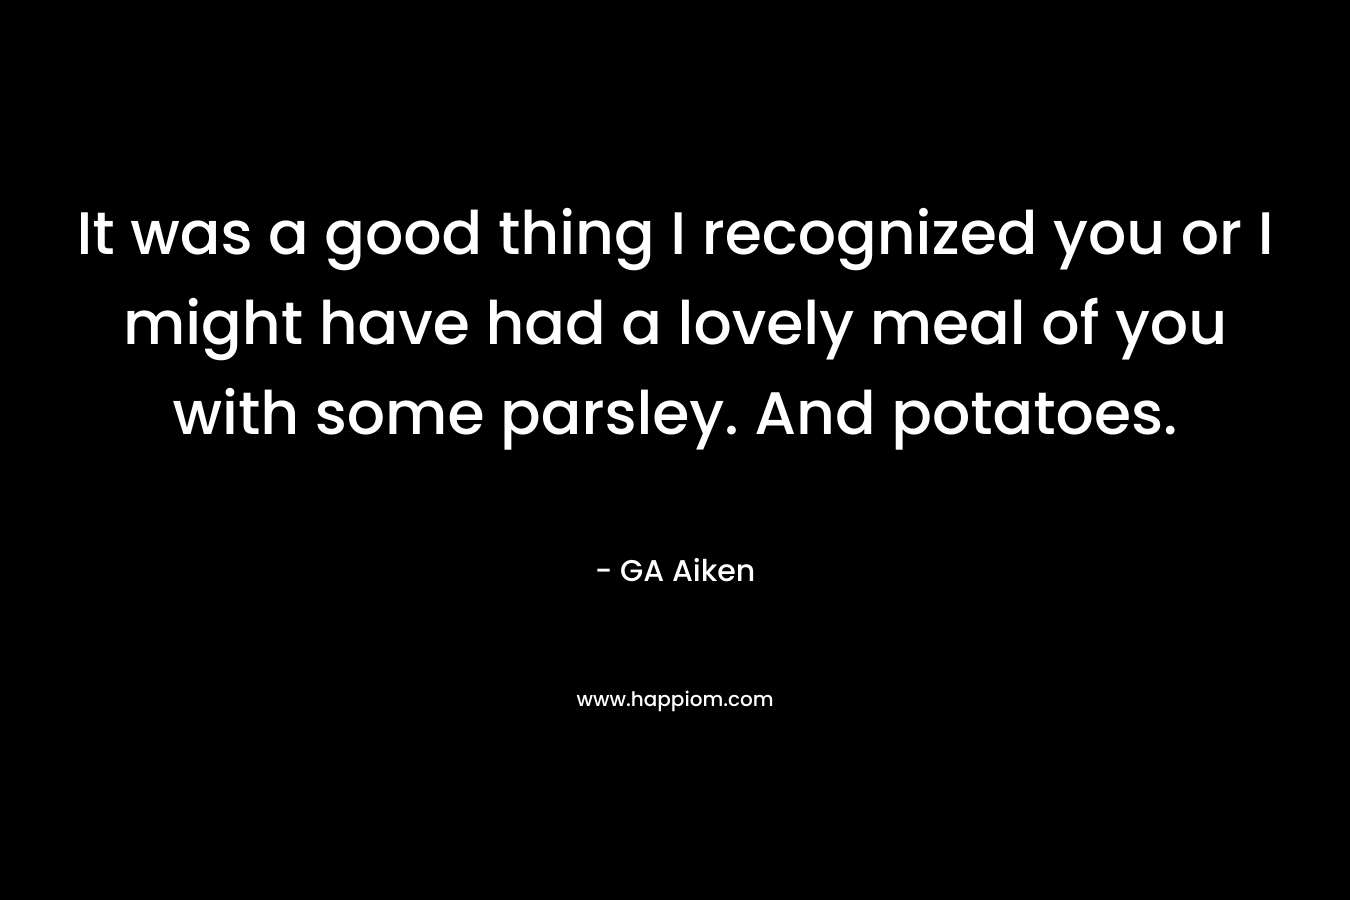 It was a good thing I recognized you or I might have had a lovely meal of you with some parsley. And potatoes. – GA Aiken